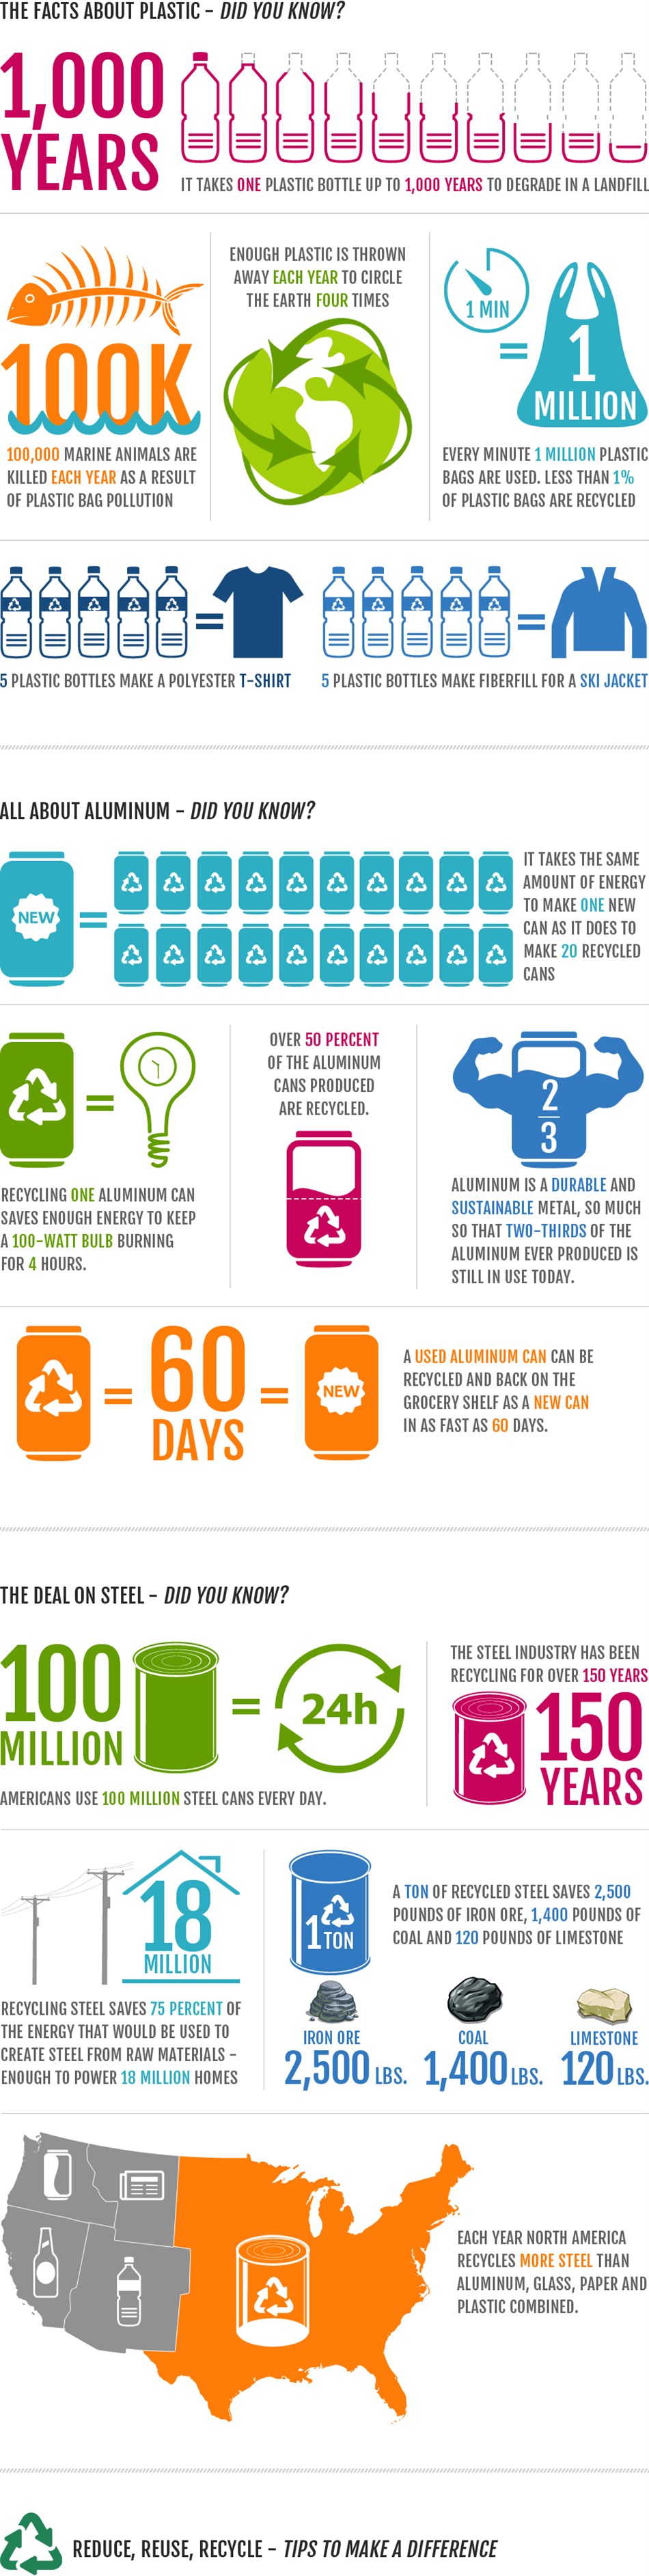 recycling_facts_trivia_950x3772